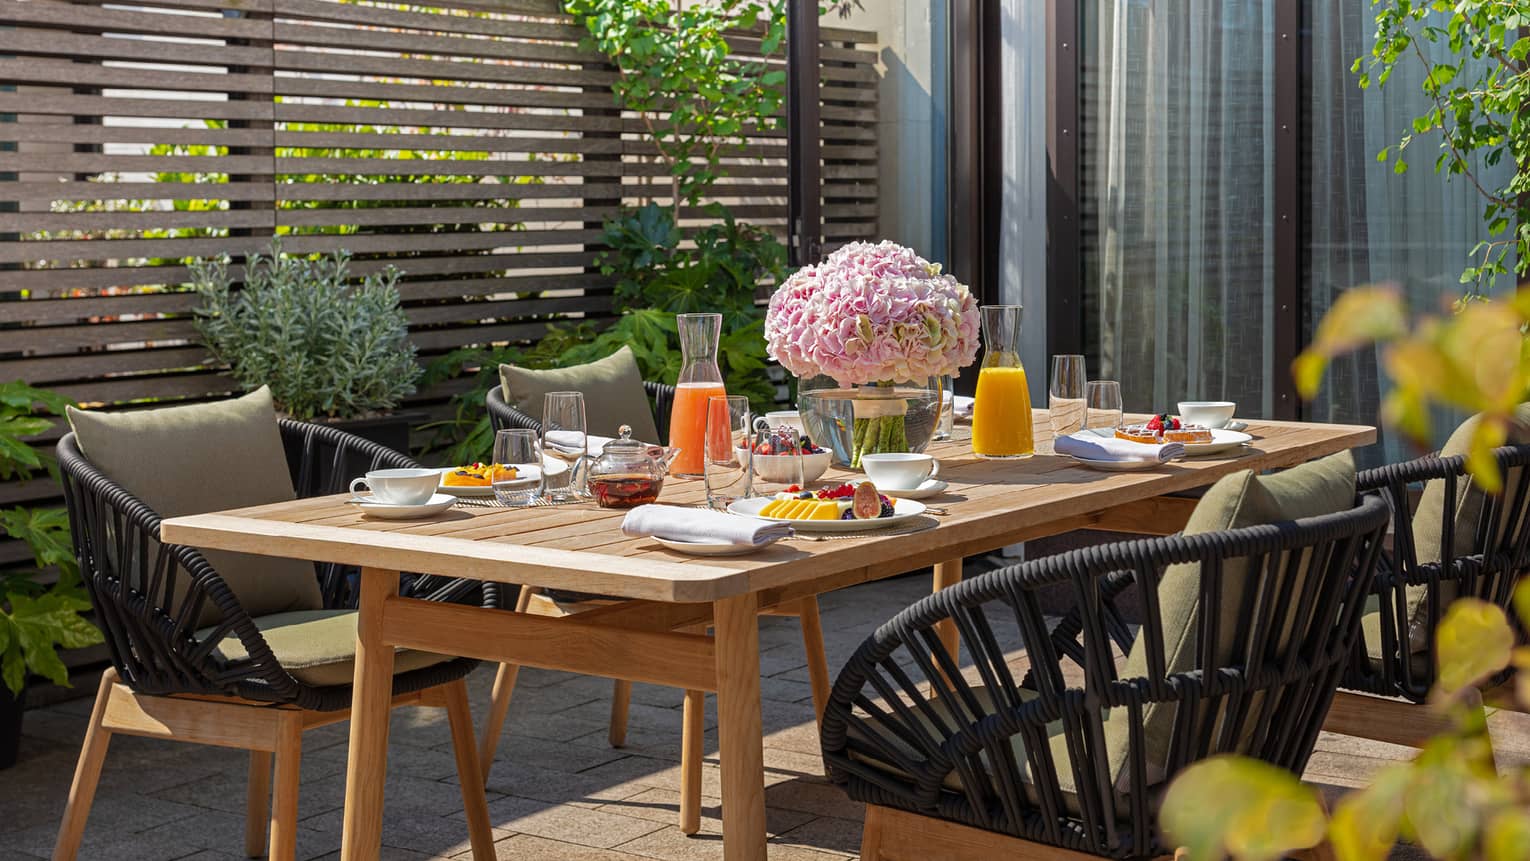 The Executive Conservatory at Four Seasons London Park Lane in Mayfair features an inviting outdoor dining area. A rustic wooden table is set with a colorful breakfast spread, including fresh fruits, pastries, juices, and tea. The table is beautifully decorated with a large bouquet of pink hydrangeas, enhancing the fresh, vibrant setting. Stylish black wicker chairs with comfortable cushions surround the table, nestled amidst lush greenery and a modern wooden slatted privacy screen. The scene is sunlit, offering a pleasant and serene dining experience.